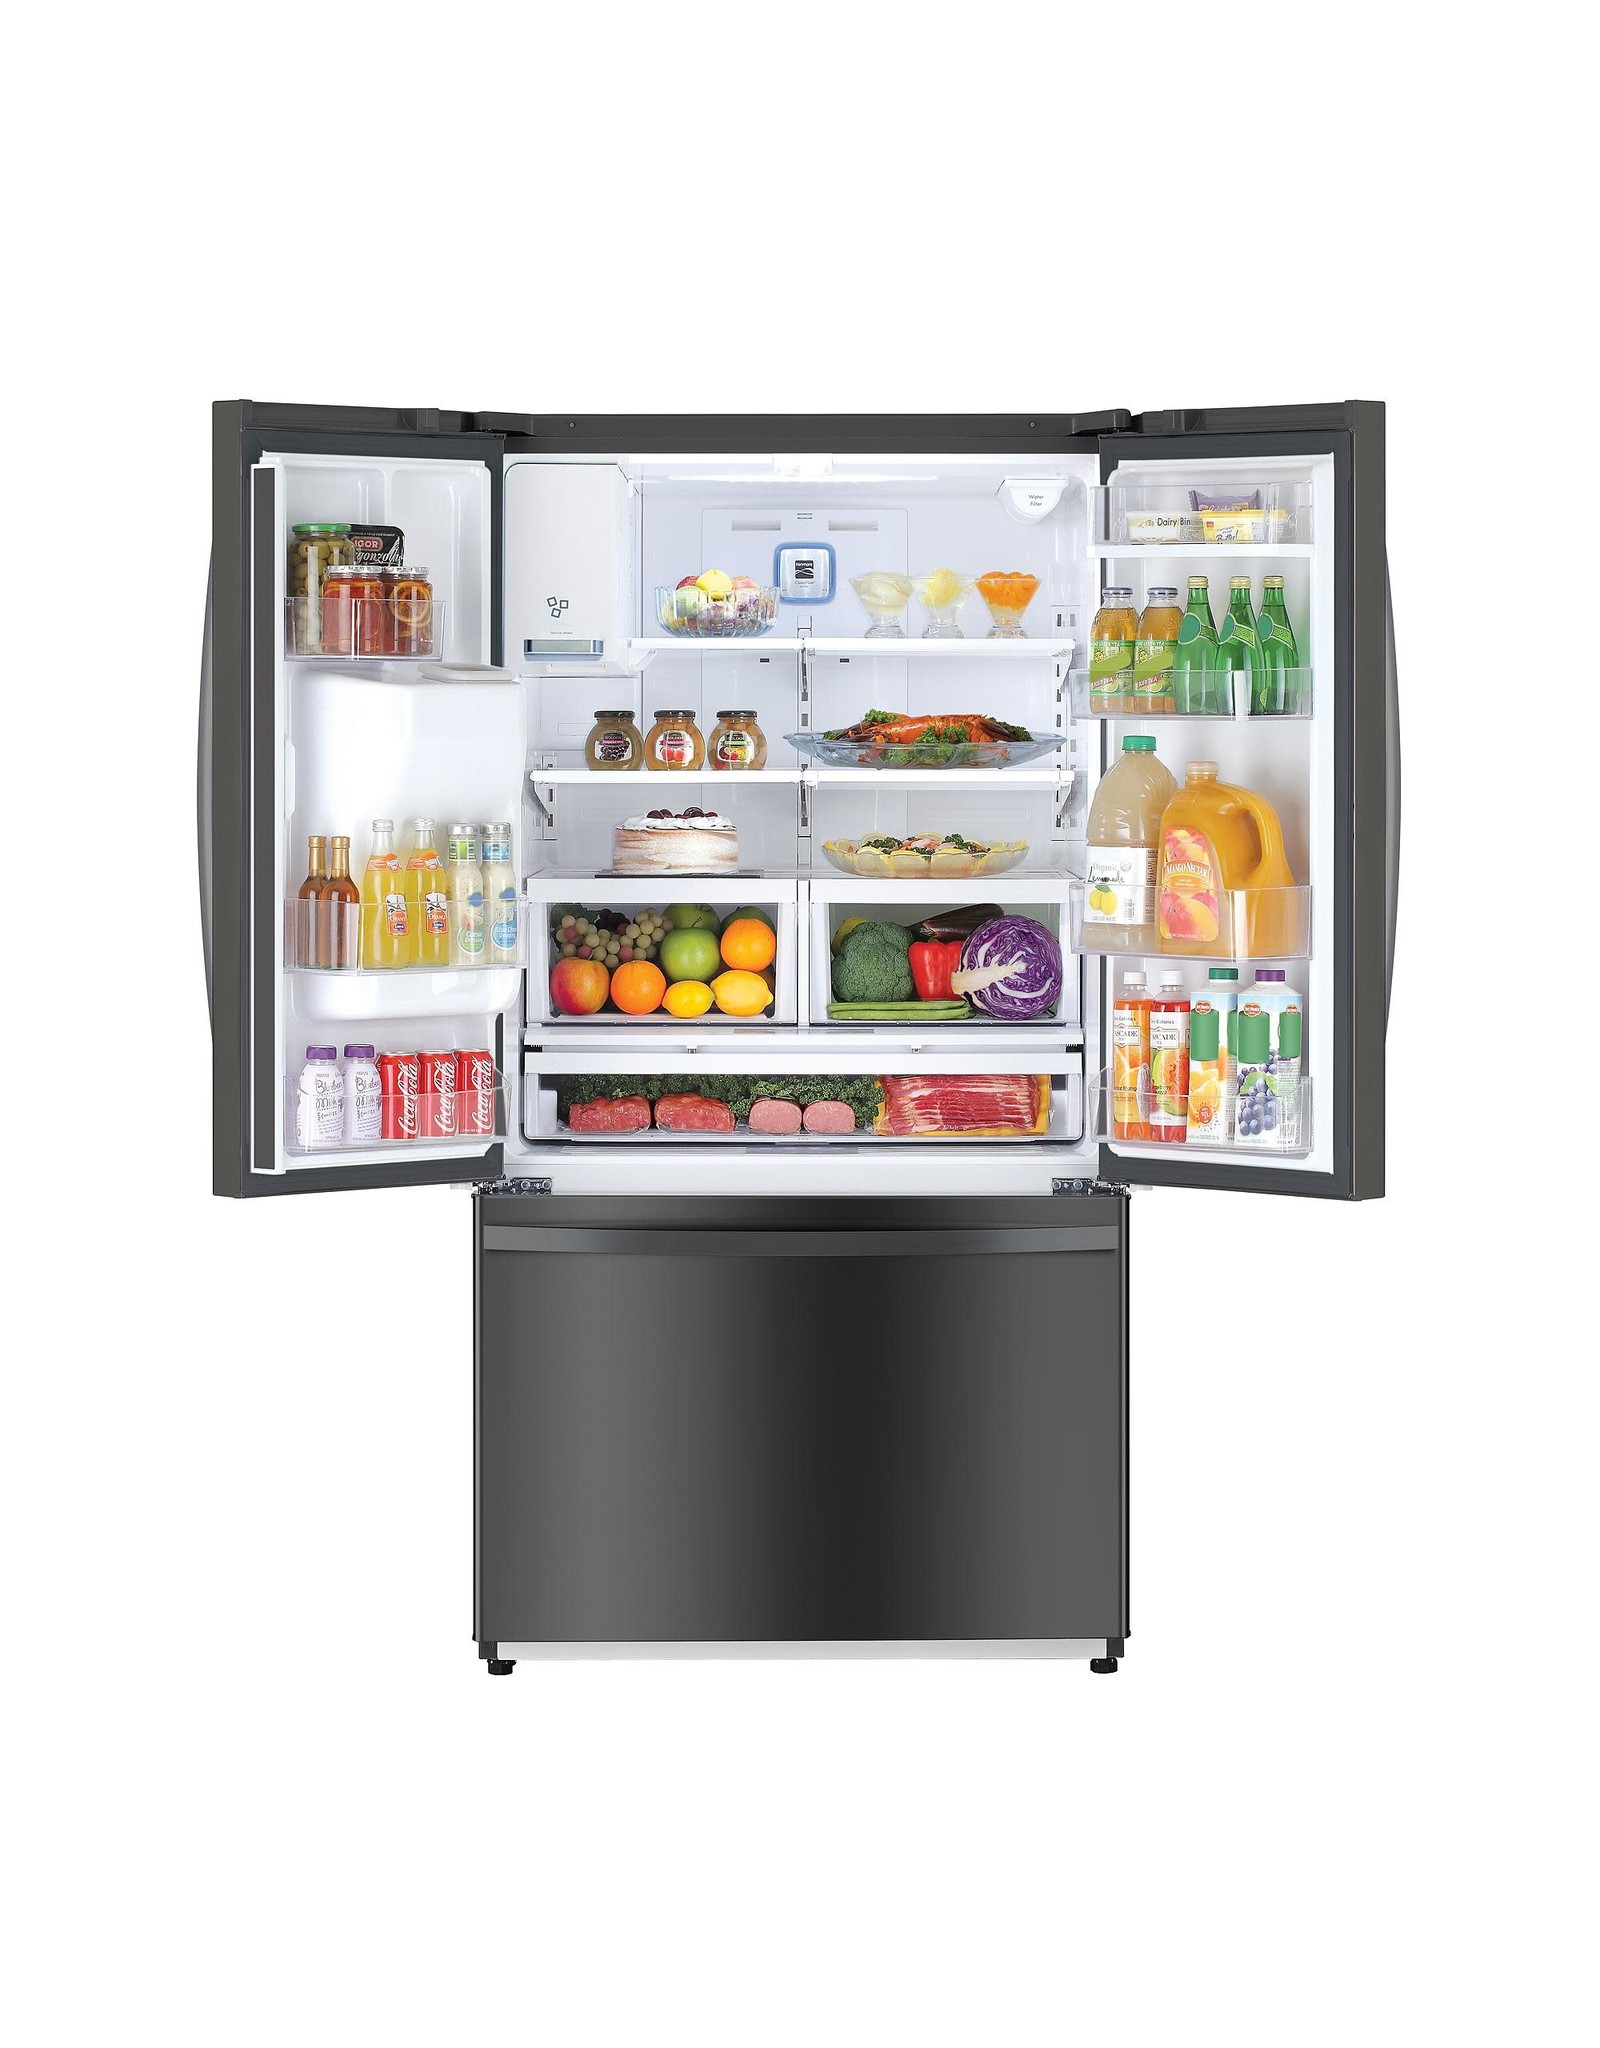 KENMORE Kenmore 75507 25.5 cu. ft. French Door Refrigerator with Dual Ice Makers - Black Stainless Steel